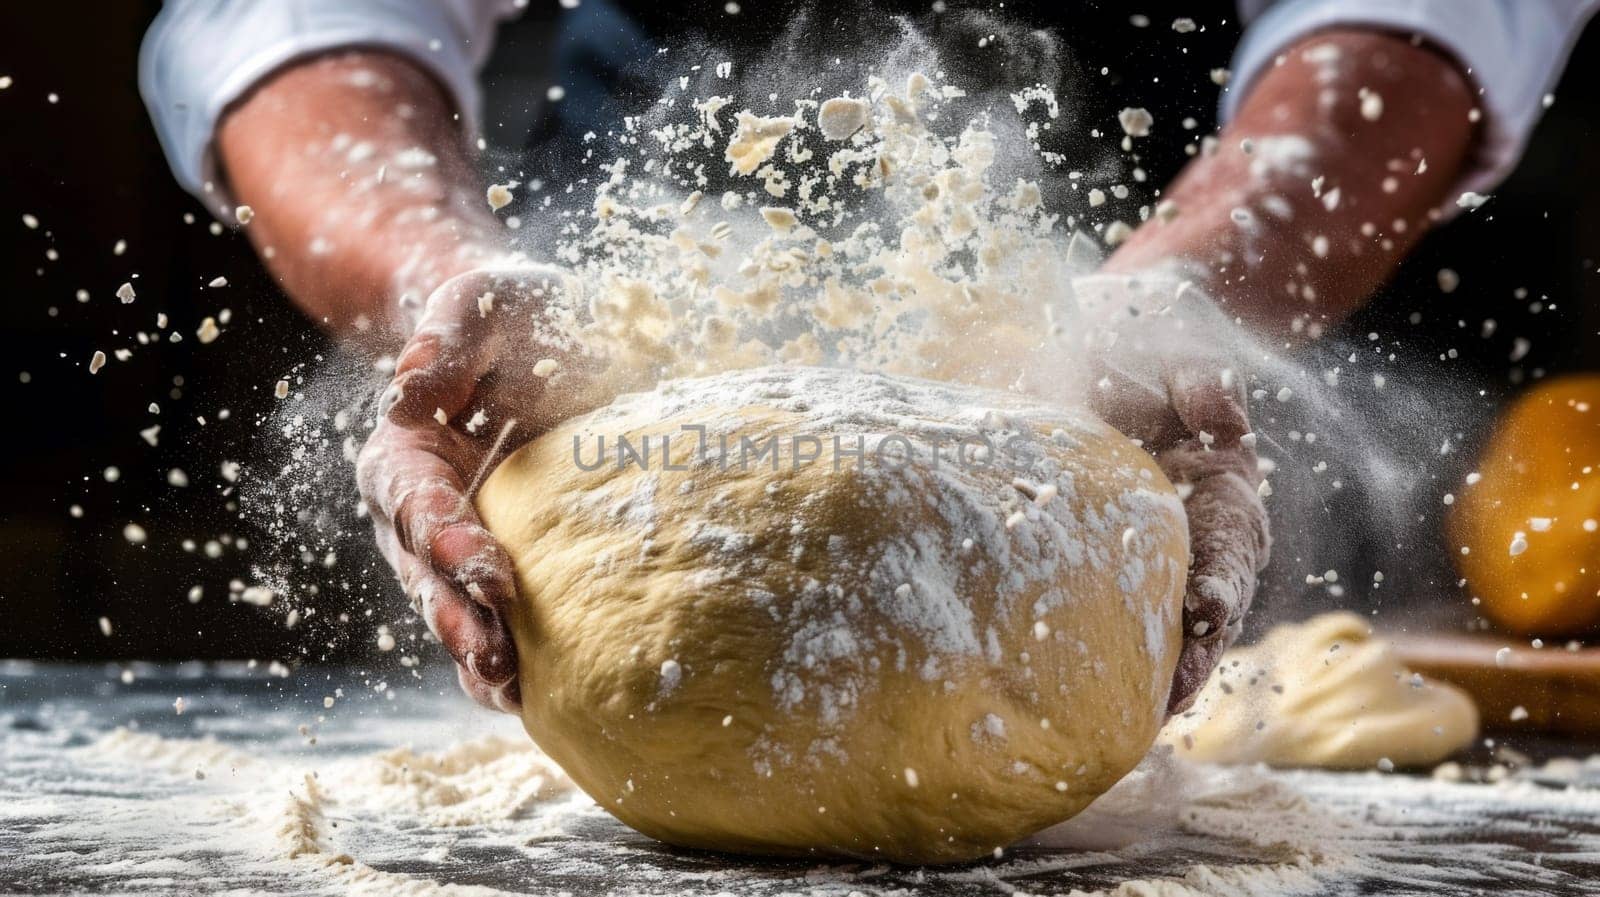 A person is making a dough ball with flour and water